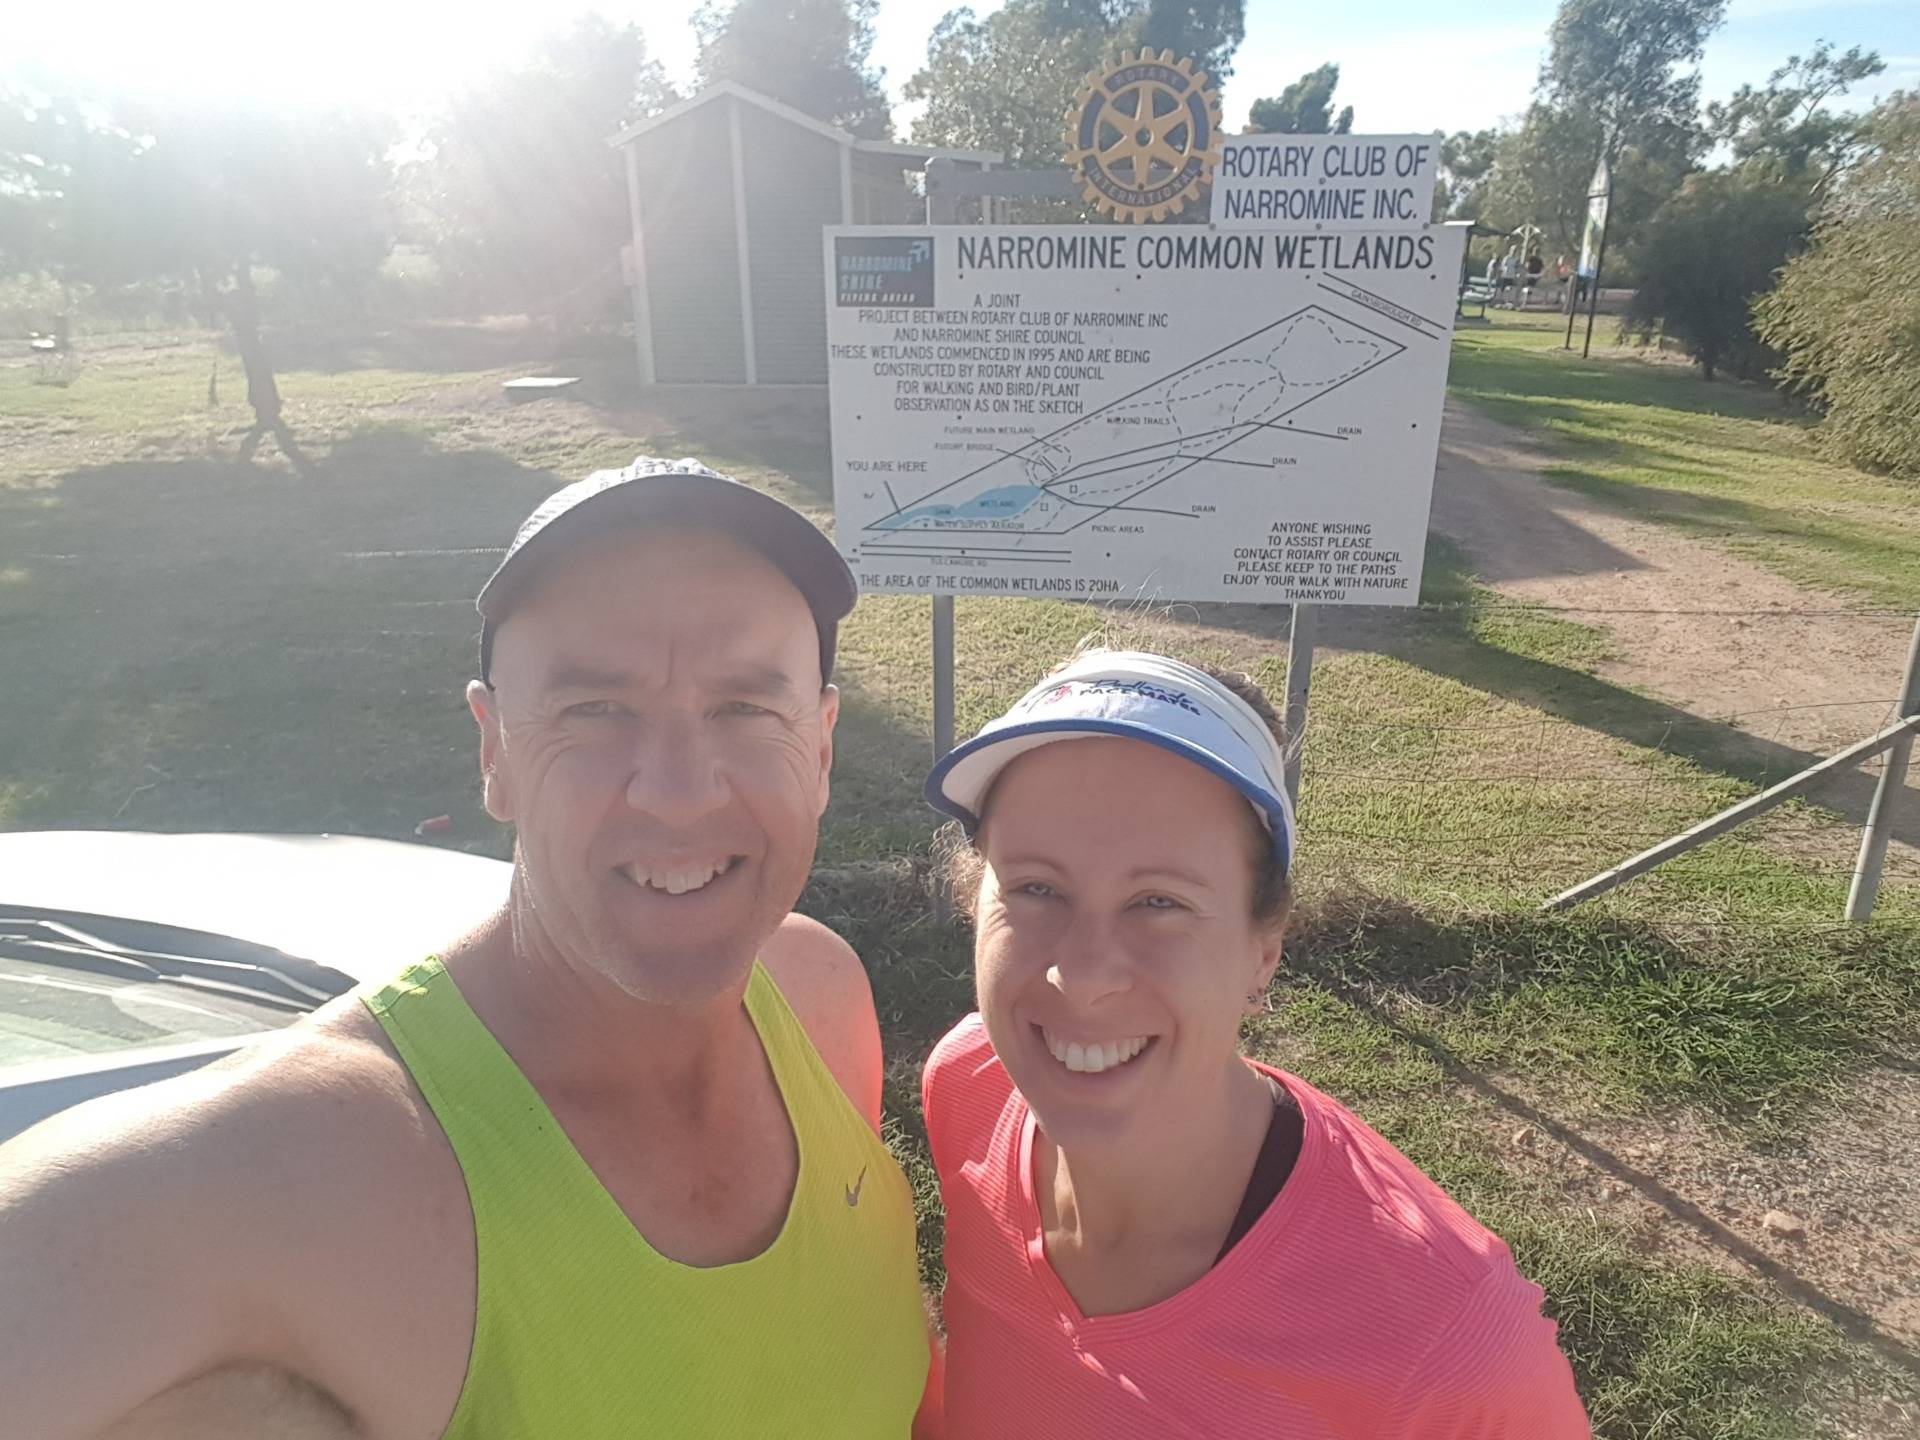 Usually, we can only do an official parkrun on Saturday, except each country is allowed two special event days. Australia has Christmas and New Years Day. It so happened that in 2021 New Years Day fell on a Friday so we got two new parkruns done on consecutive days. One of the reasons we choose Dubbo was because Narromine Wetlands was just a half hour drive down the road. It was great for our parkrun stats but pretty heavy on the legs.